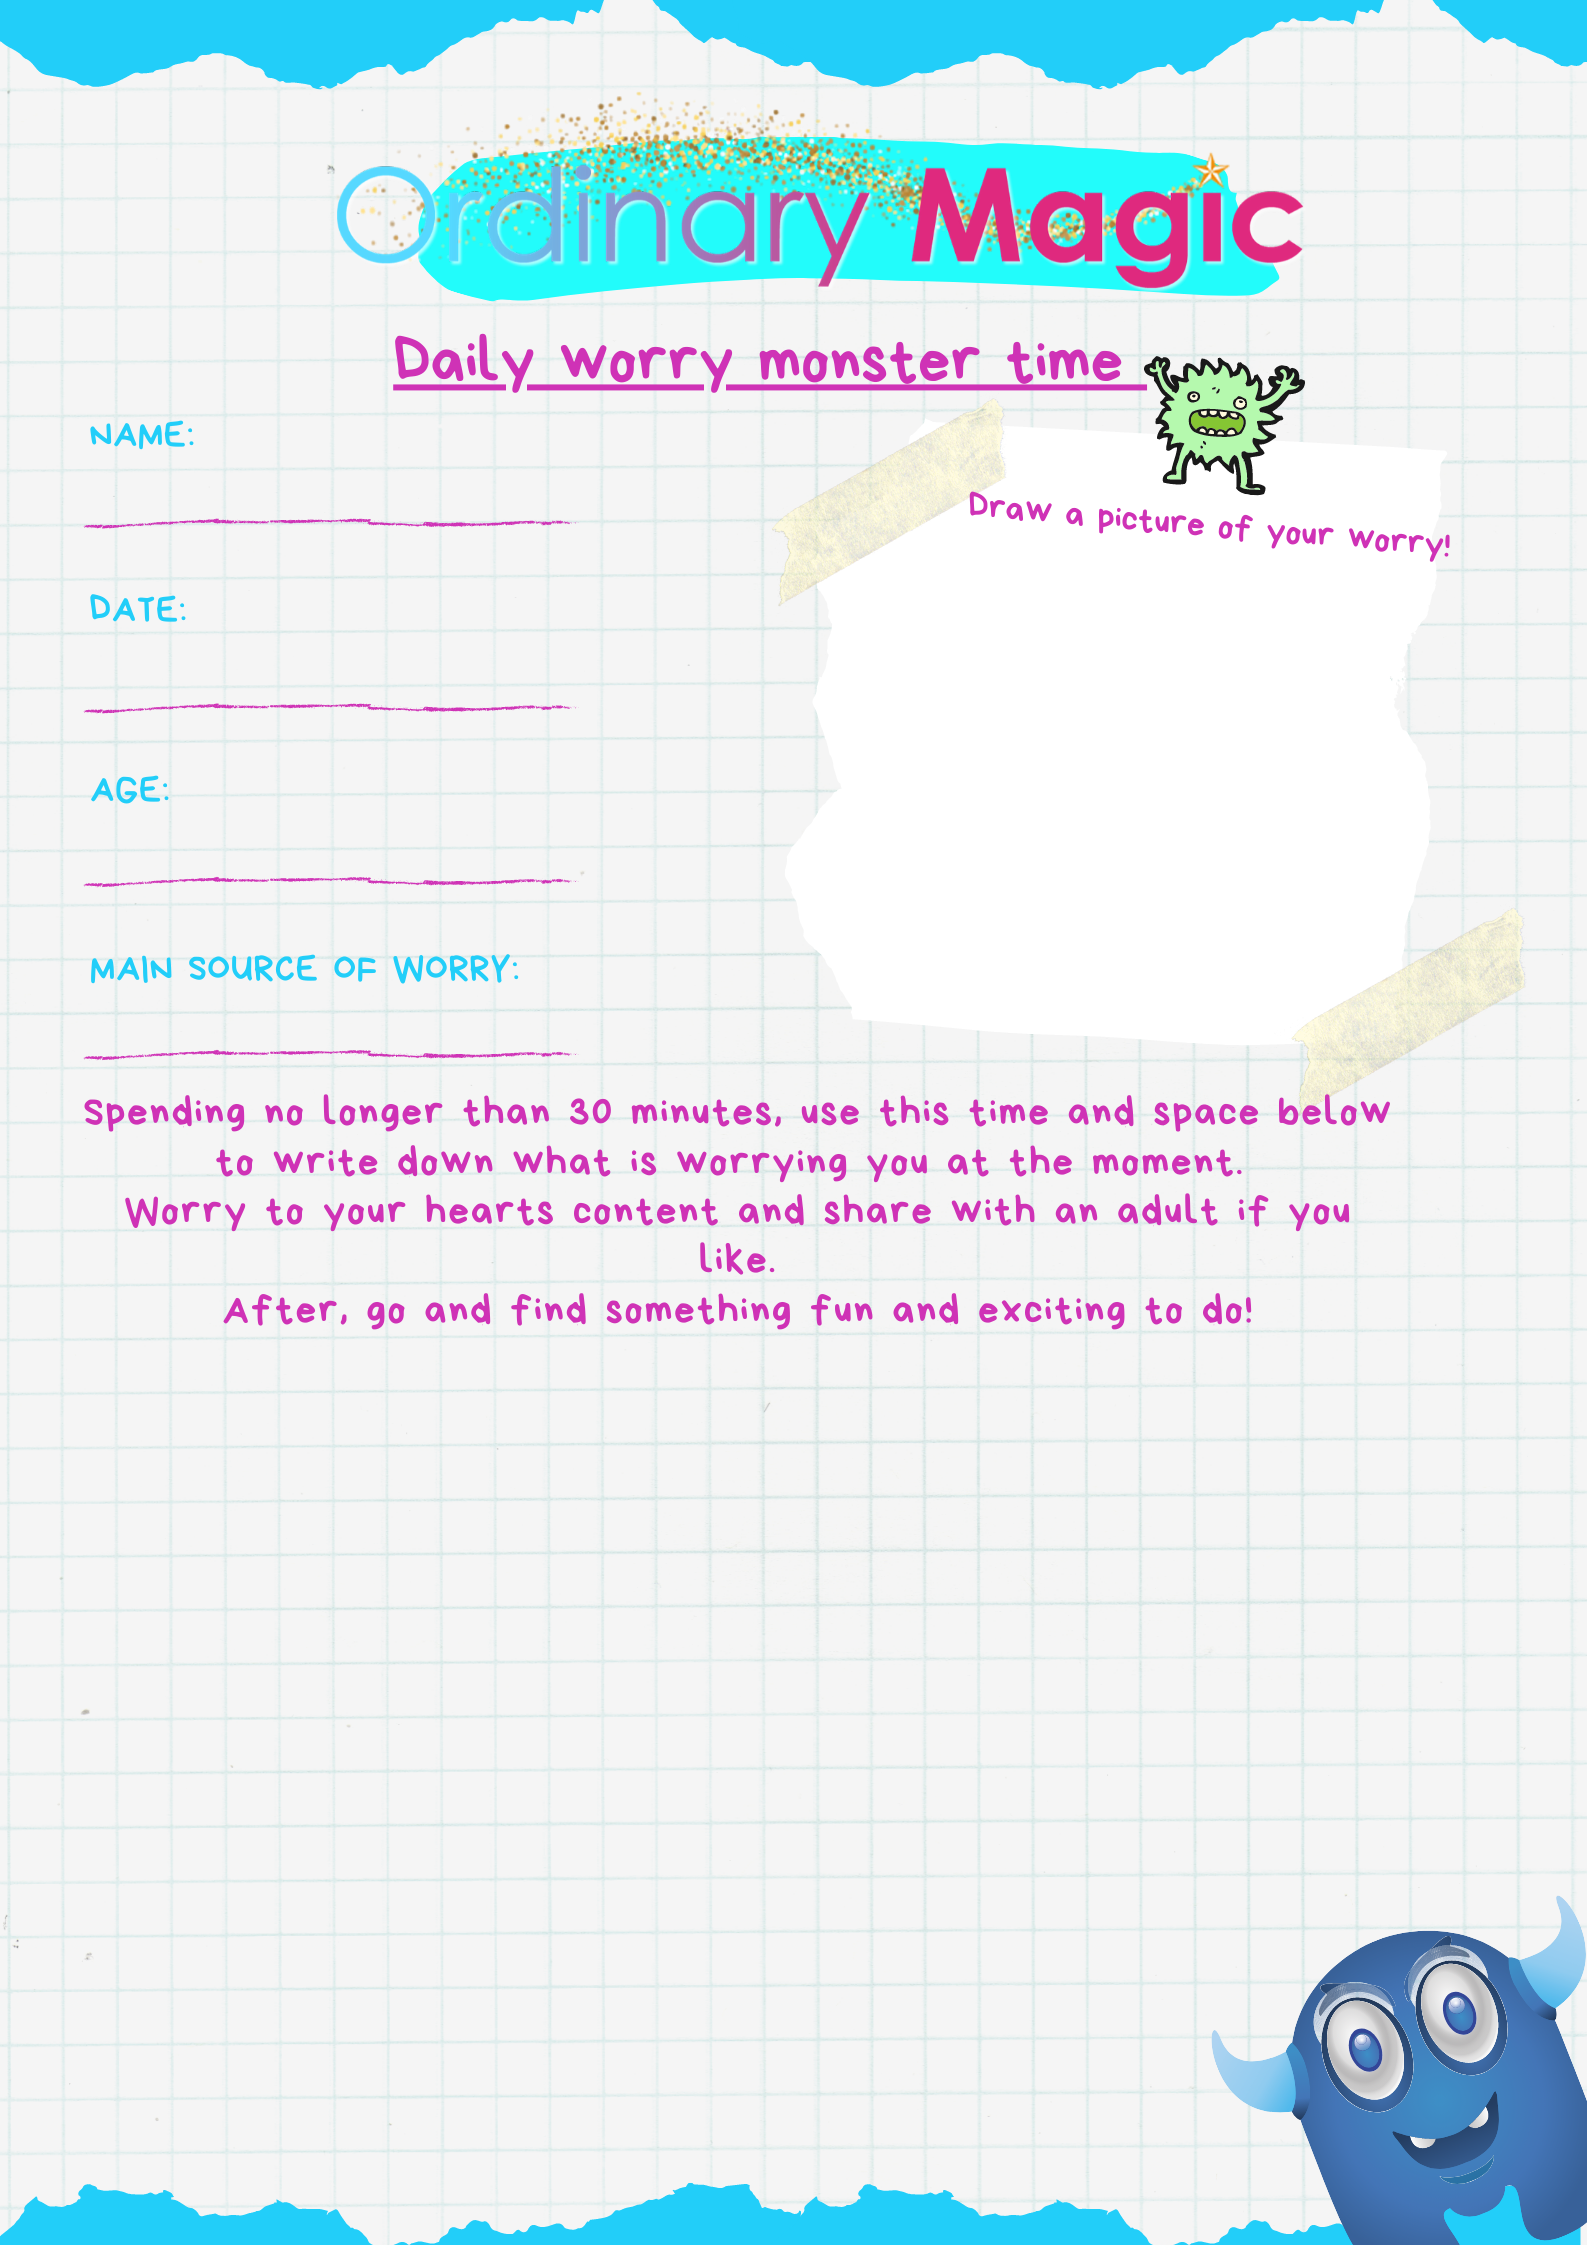 Daily Worry Monster time